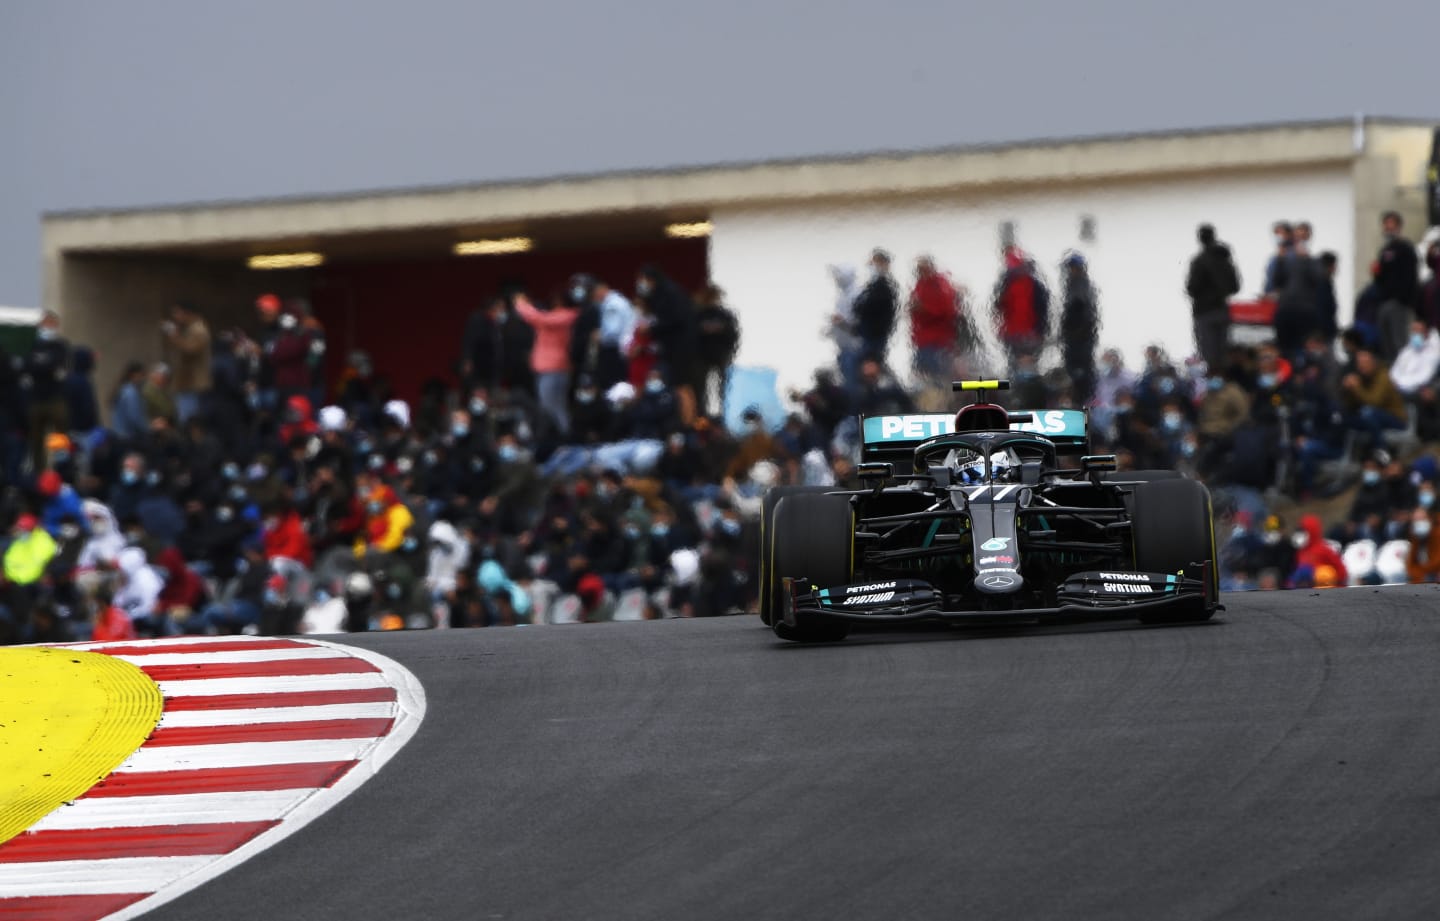 PORTIMAO, PORTUGAL - OCTOBER 25: Valtteri Bottas of Finland driving the (77) Mercedes AMG Petronas F1 Team Mercedes W11 on track during the F1 Grand Prix of Portugal at Autodromo Internacional do Algarve on October 25, 2020 in Portimao, Portugal. (Photo by Rudy Carezzevoli/Getty Images)